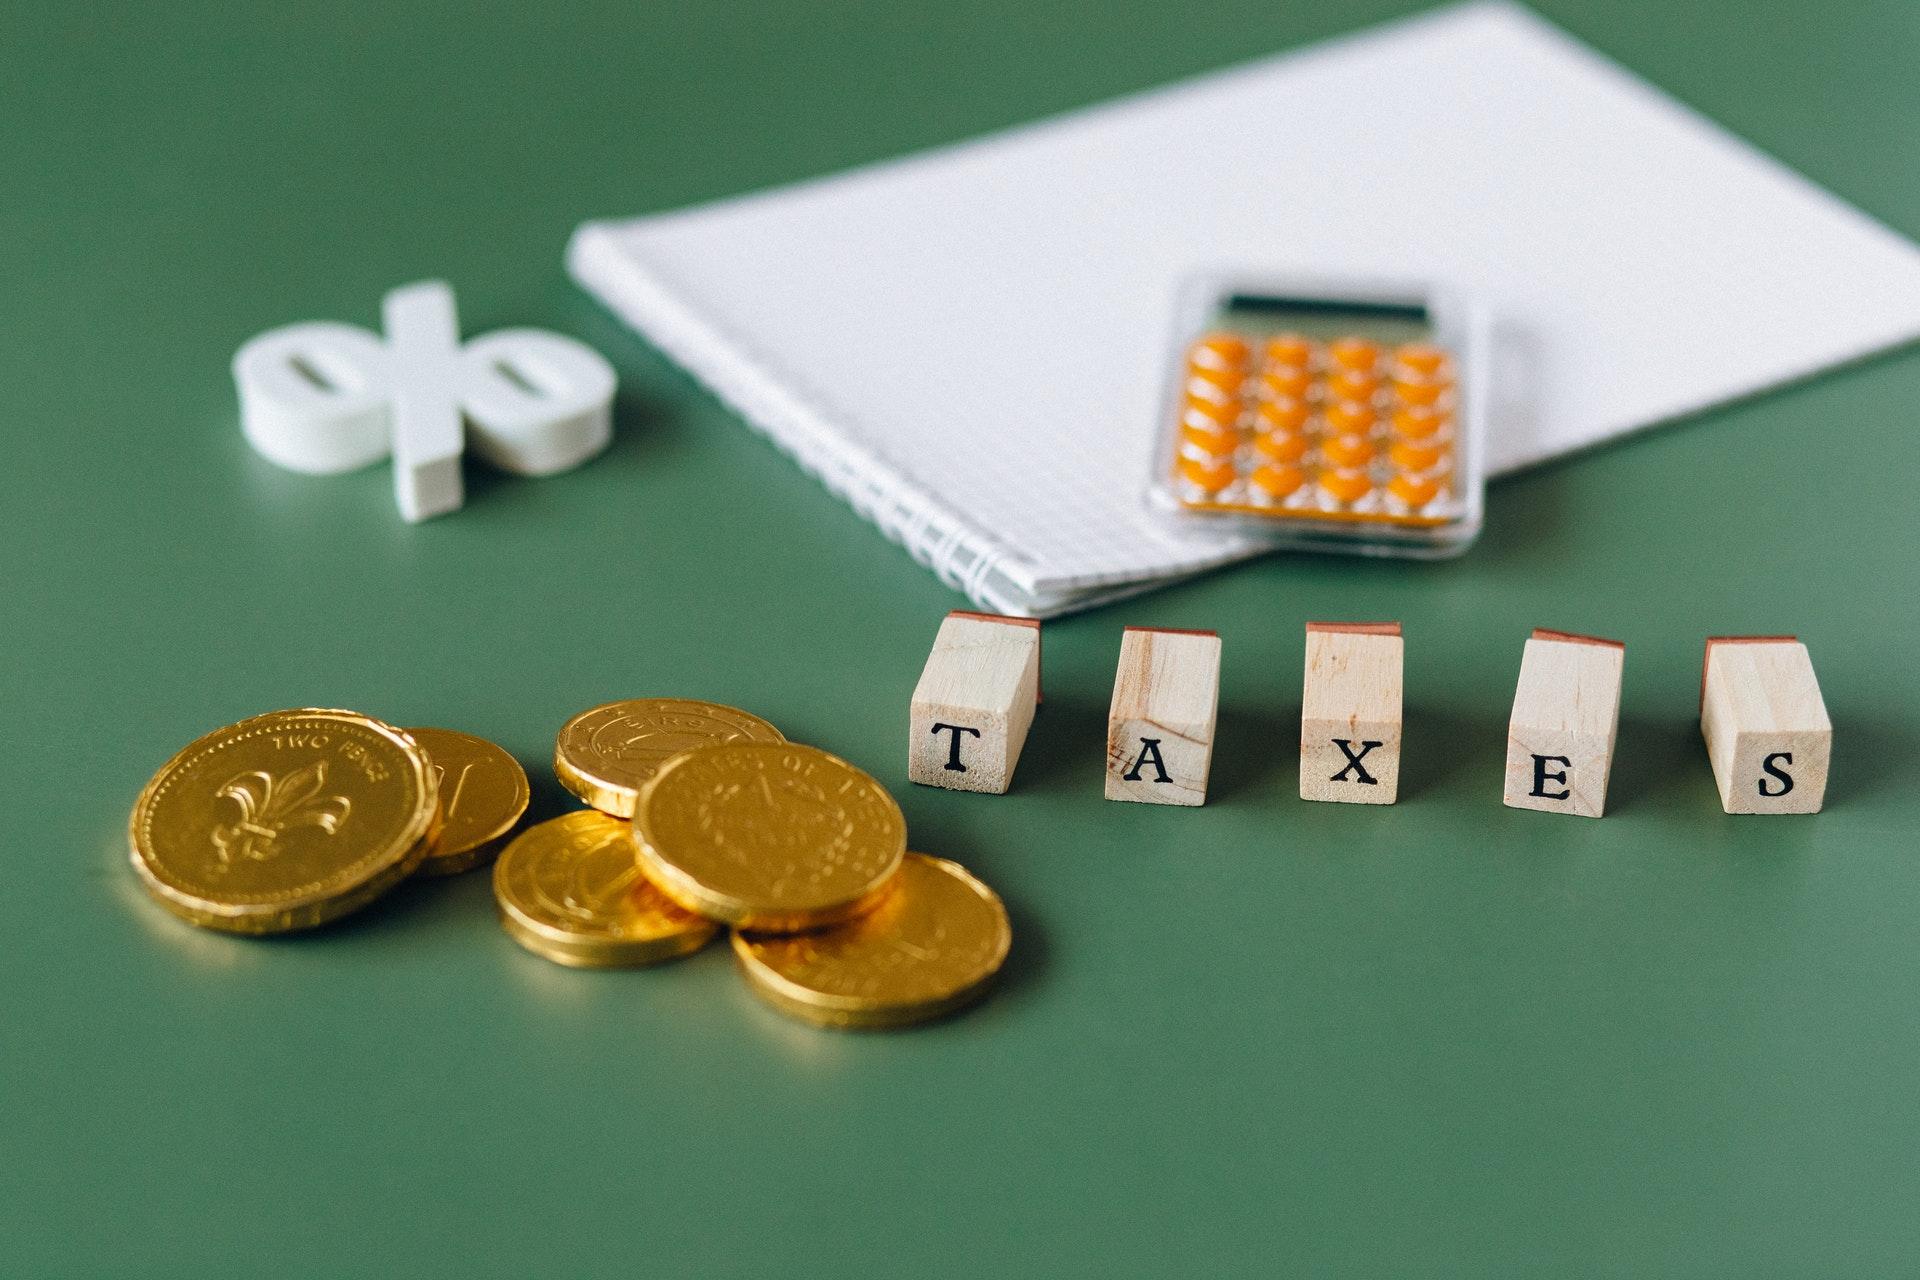 What are Child tax payments, and what are their eligibility requirements?